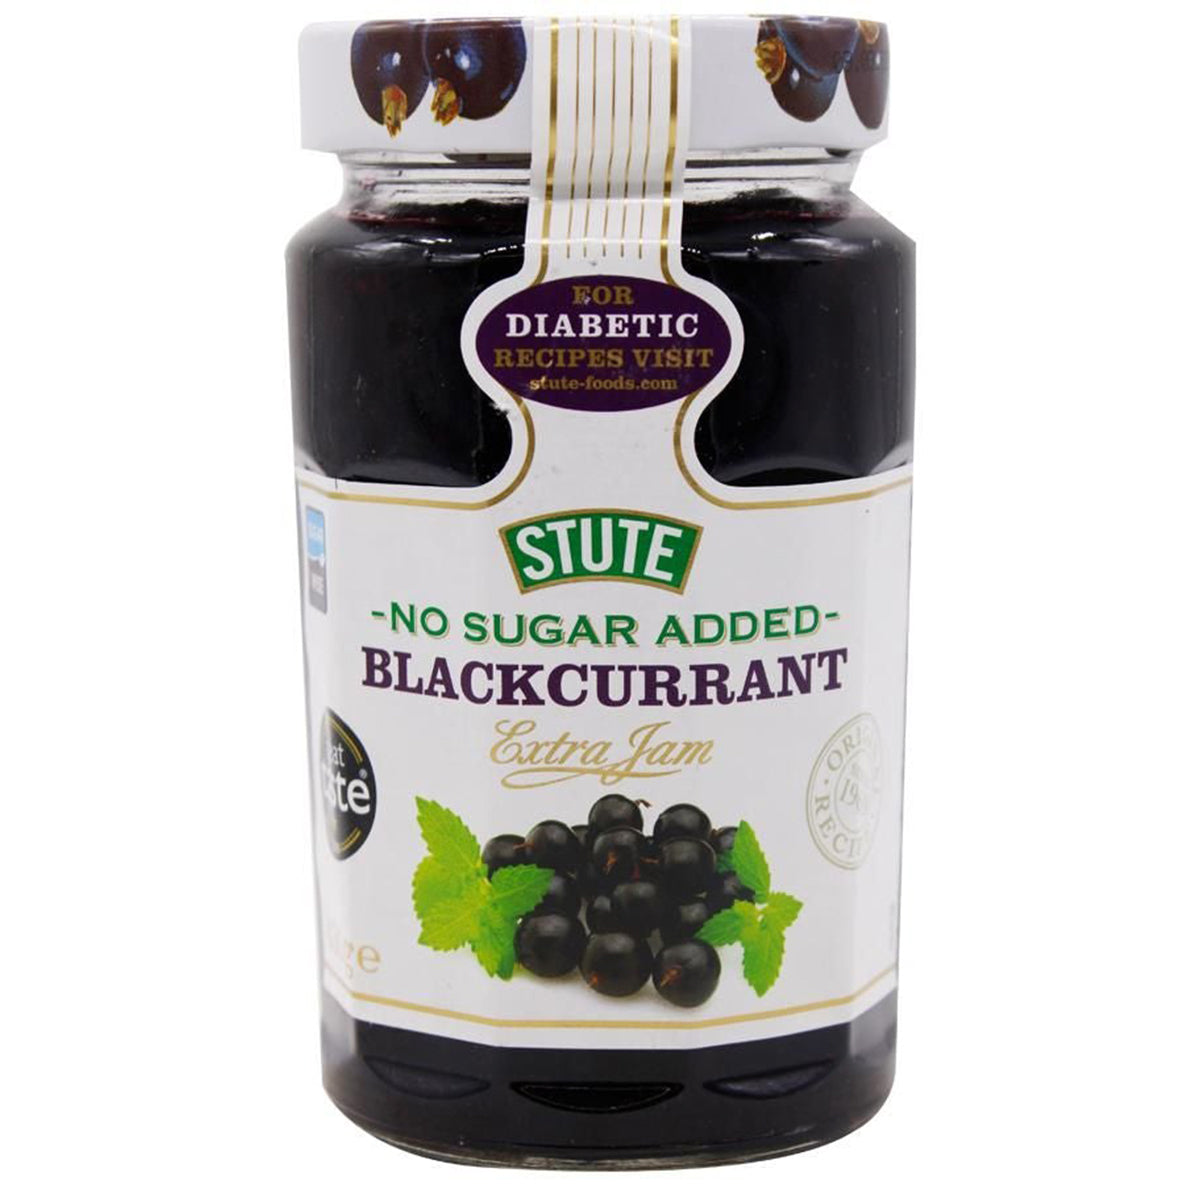 A jar of Stute - Diabetic Blackcurrant Extra Jam - 430g on a white background.